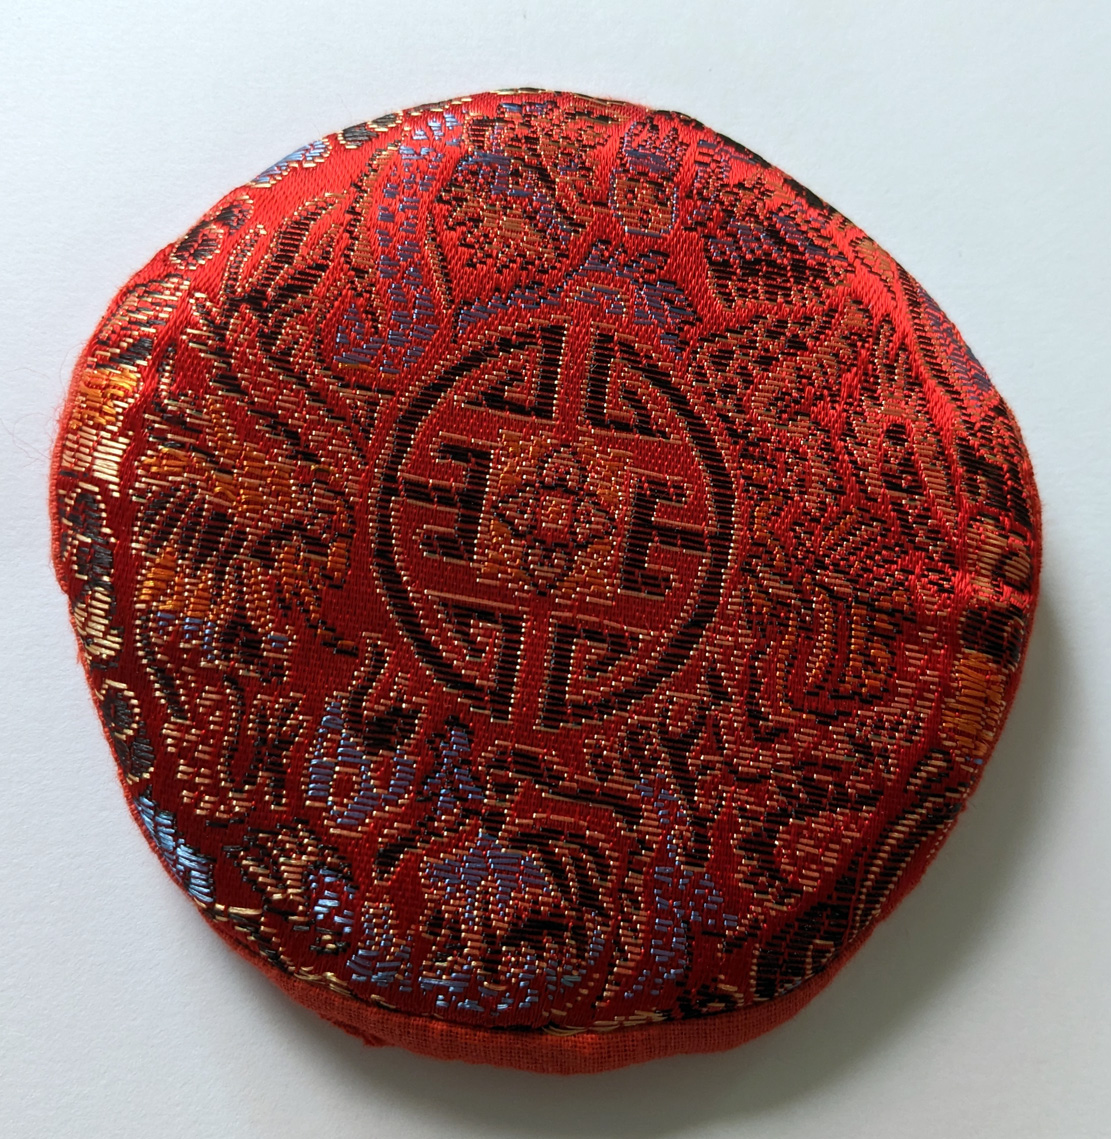 Small Thicker Quilted Paatterned Red 10cm Playing Mat for Tibetan Bowls